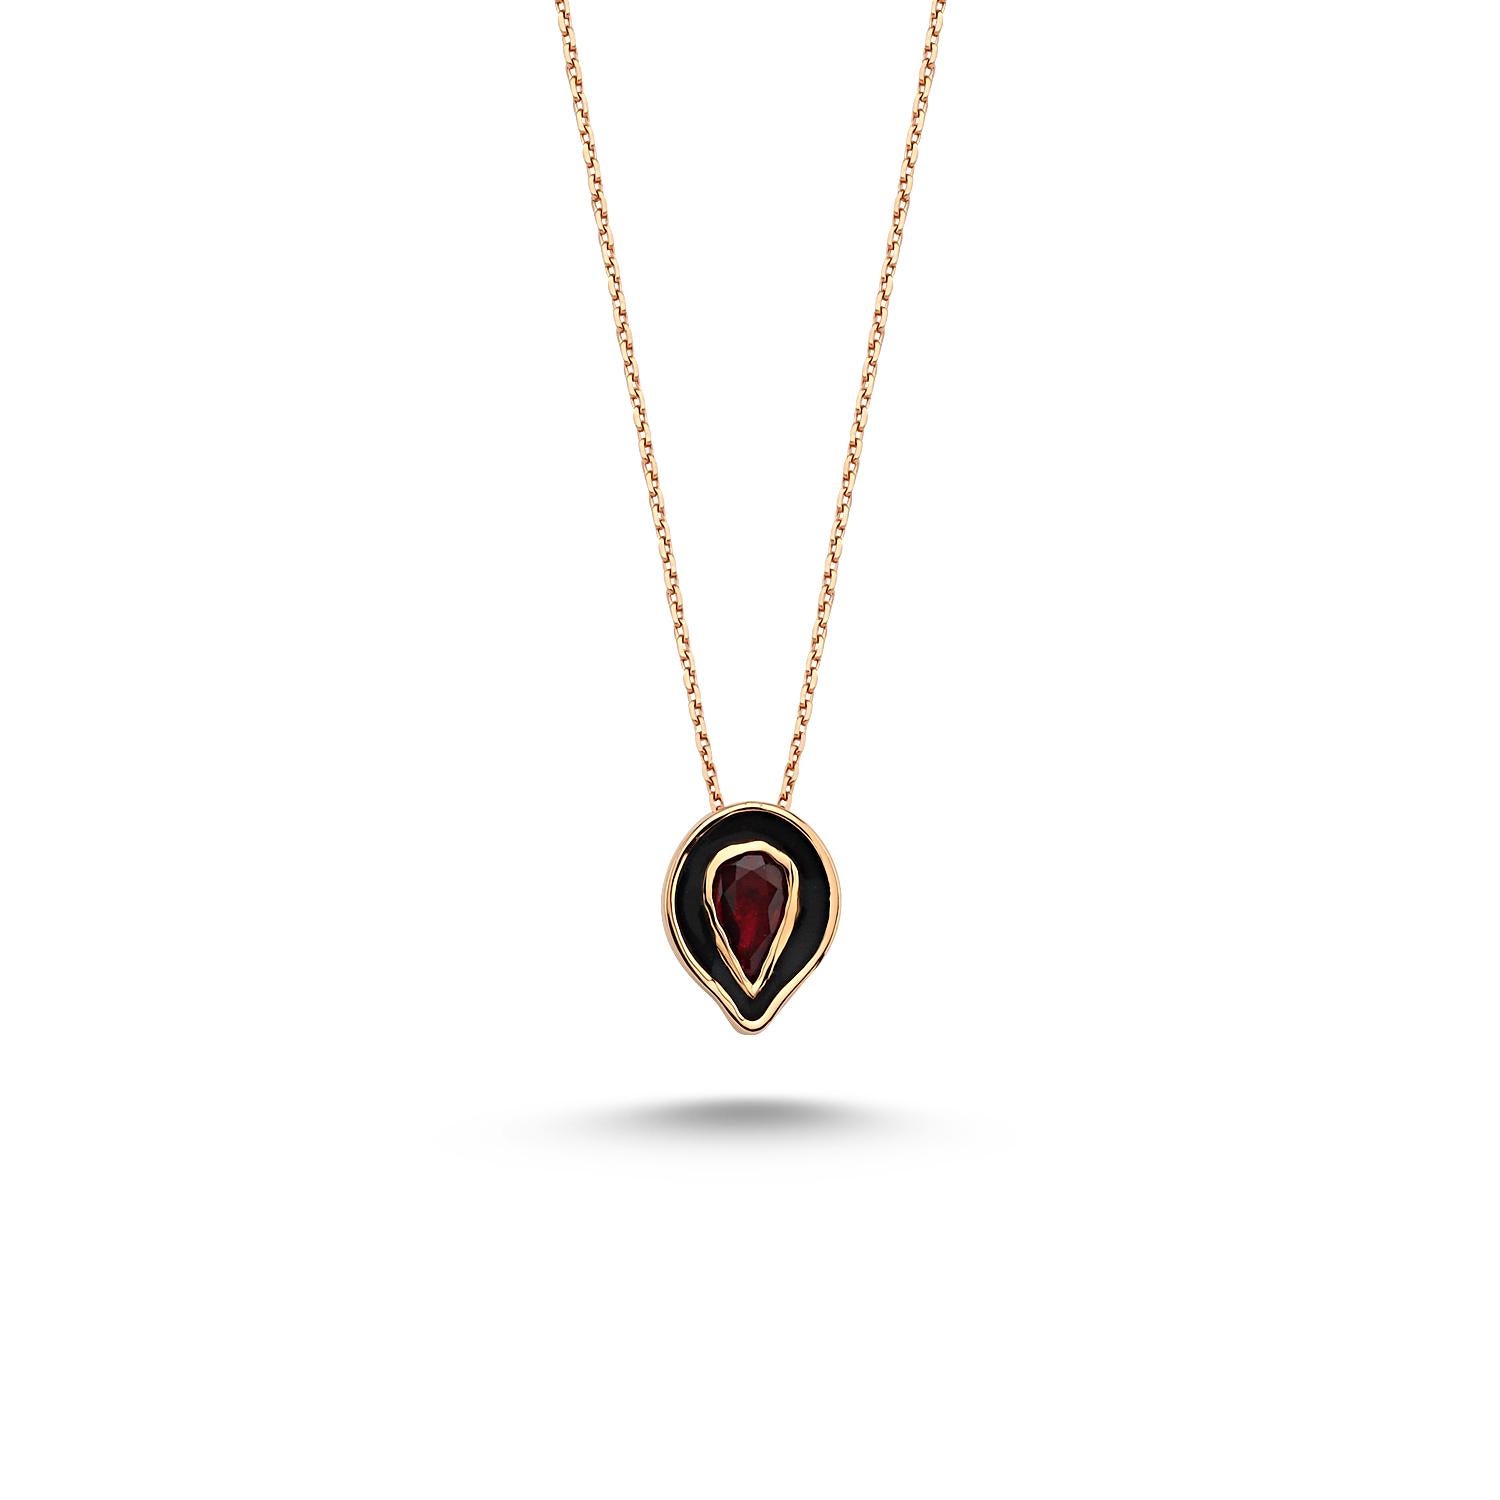 Baby dragon necklace in 14k rose gold with 0.16 ct ruby by Selda Jewellery

Additional Information:-
Collection: Dragon lady collection
14K Rose gold
0.16ct Ruby
Pendant height 0.8cm
Chain length 42cm